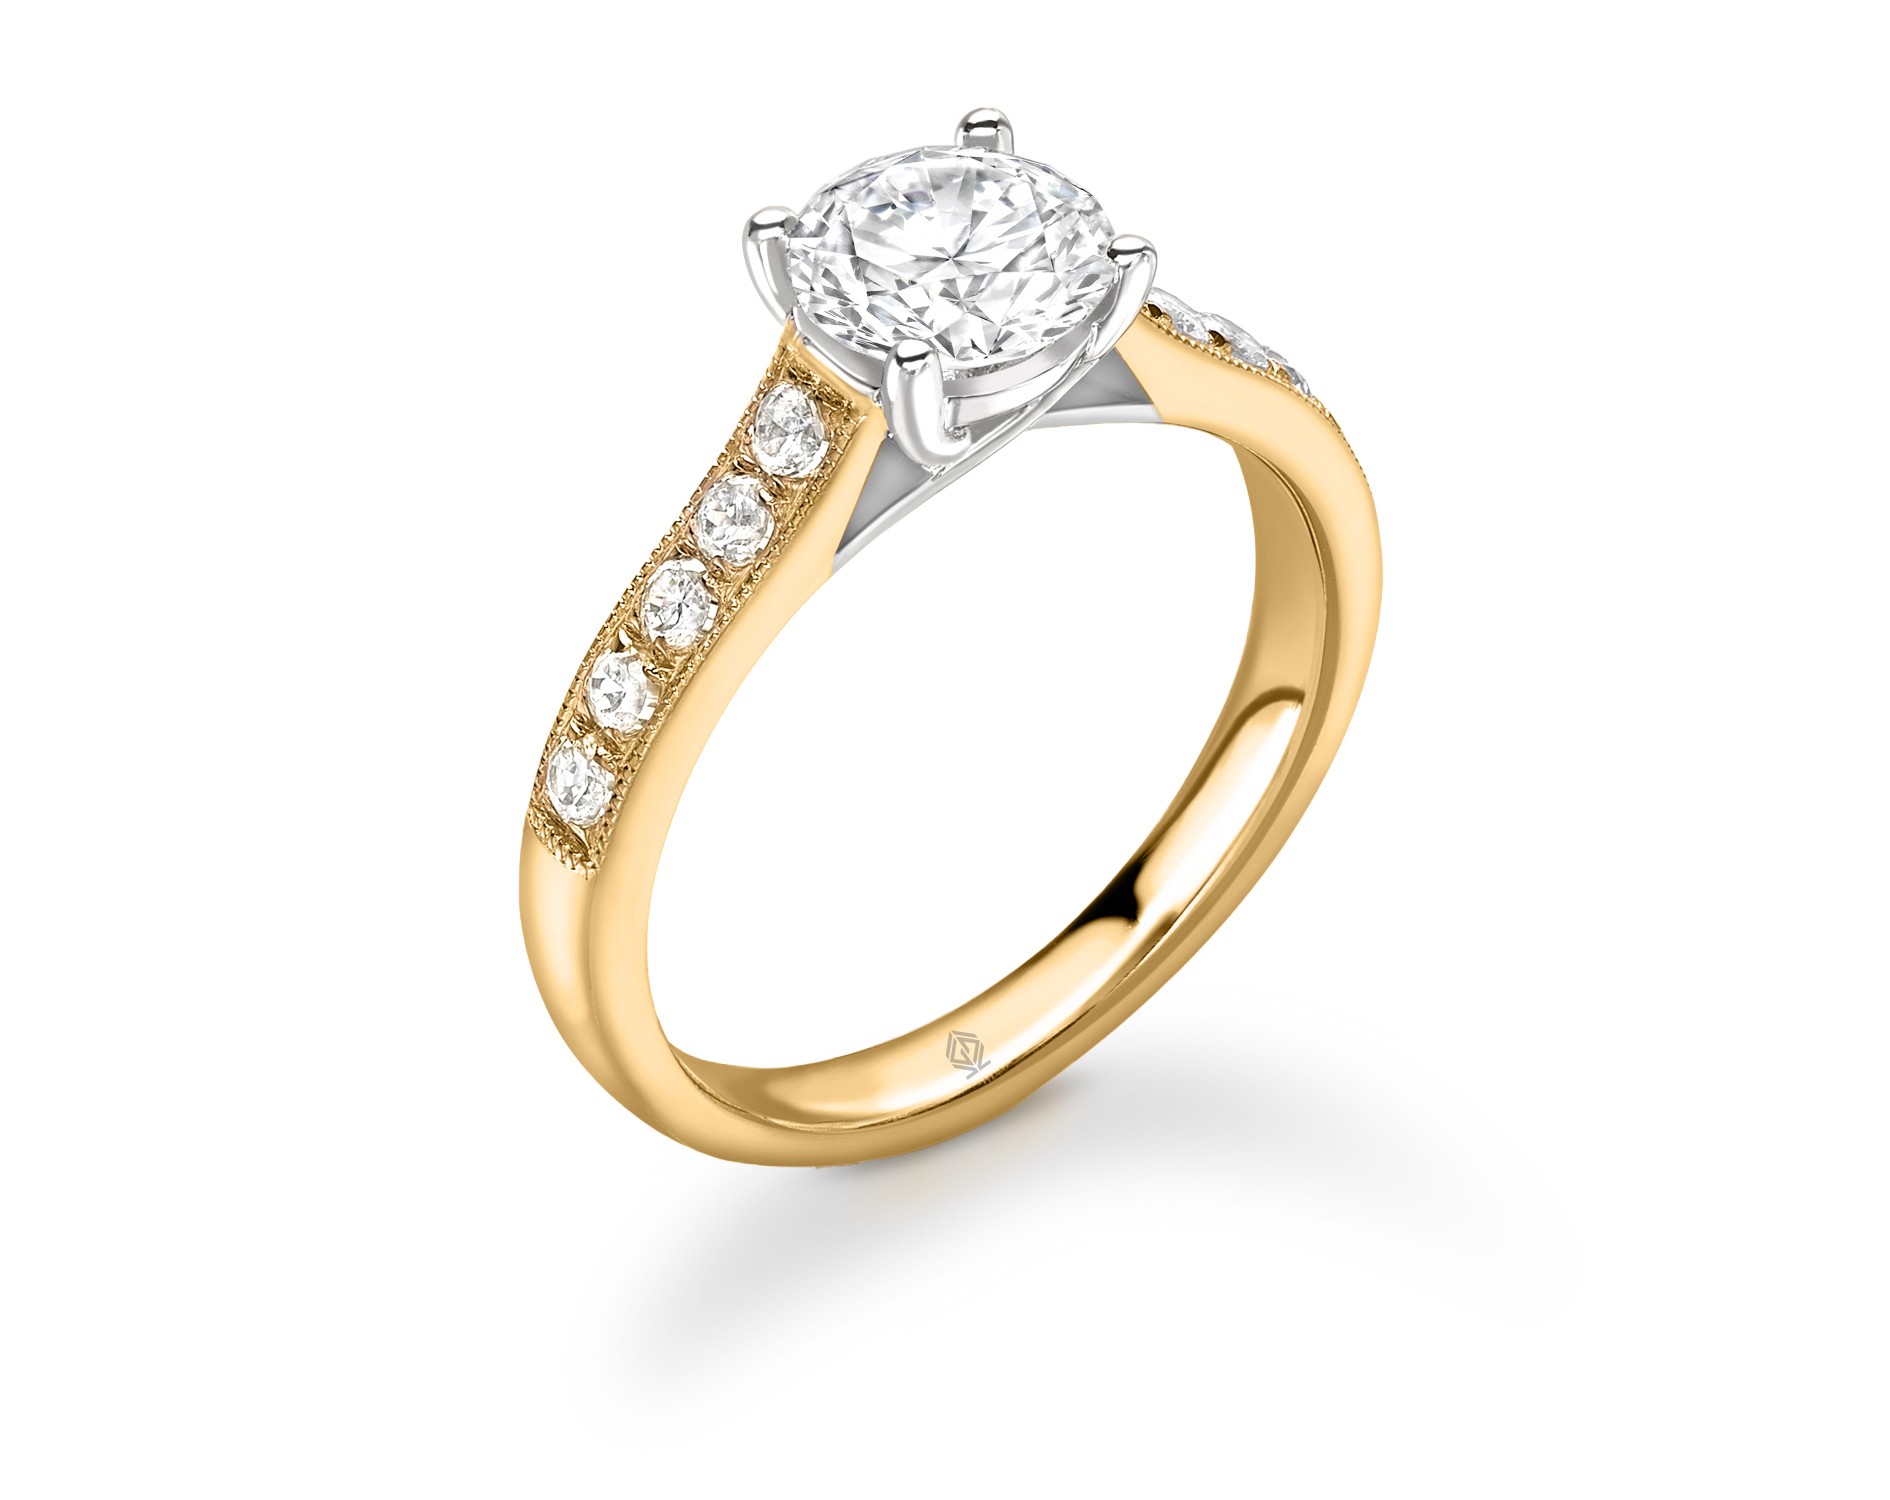 DUAL-TONE 4 PRONGS HEAD ROUND CUT DIAMOND ENGAGEMENT RING WITH SIDE STONES MILGRAIN CHANNEL SET